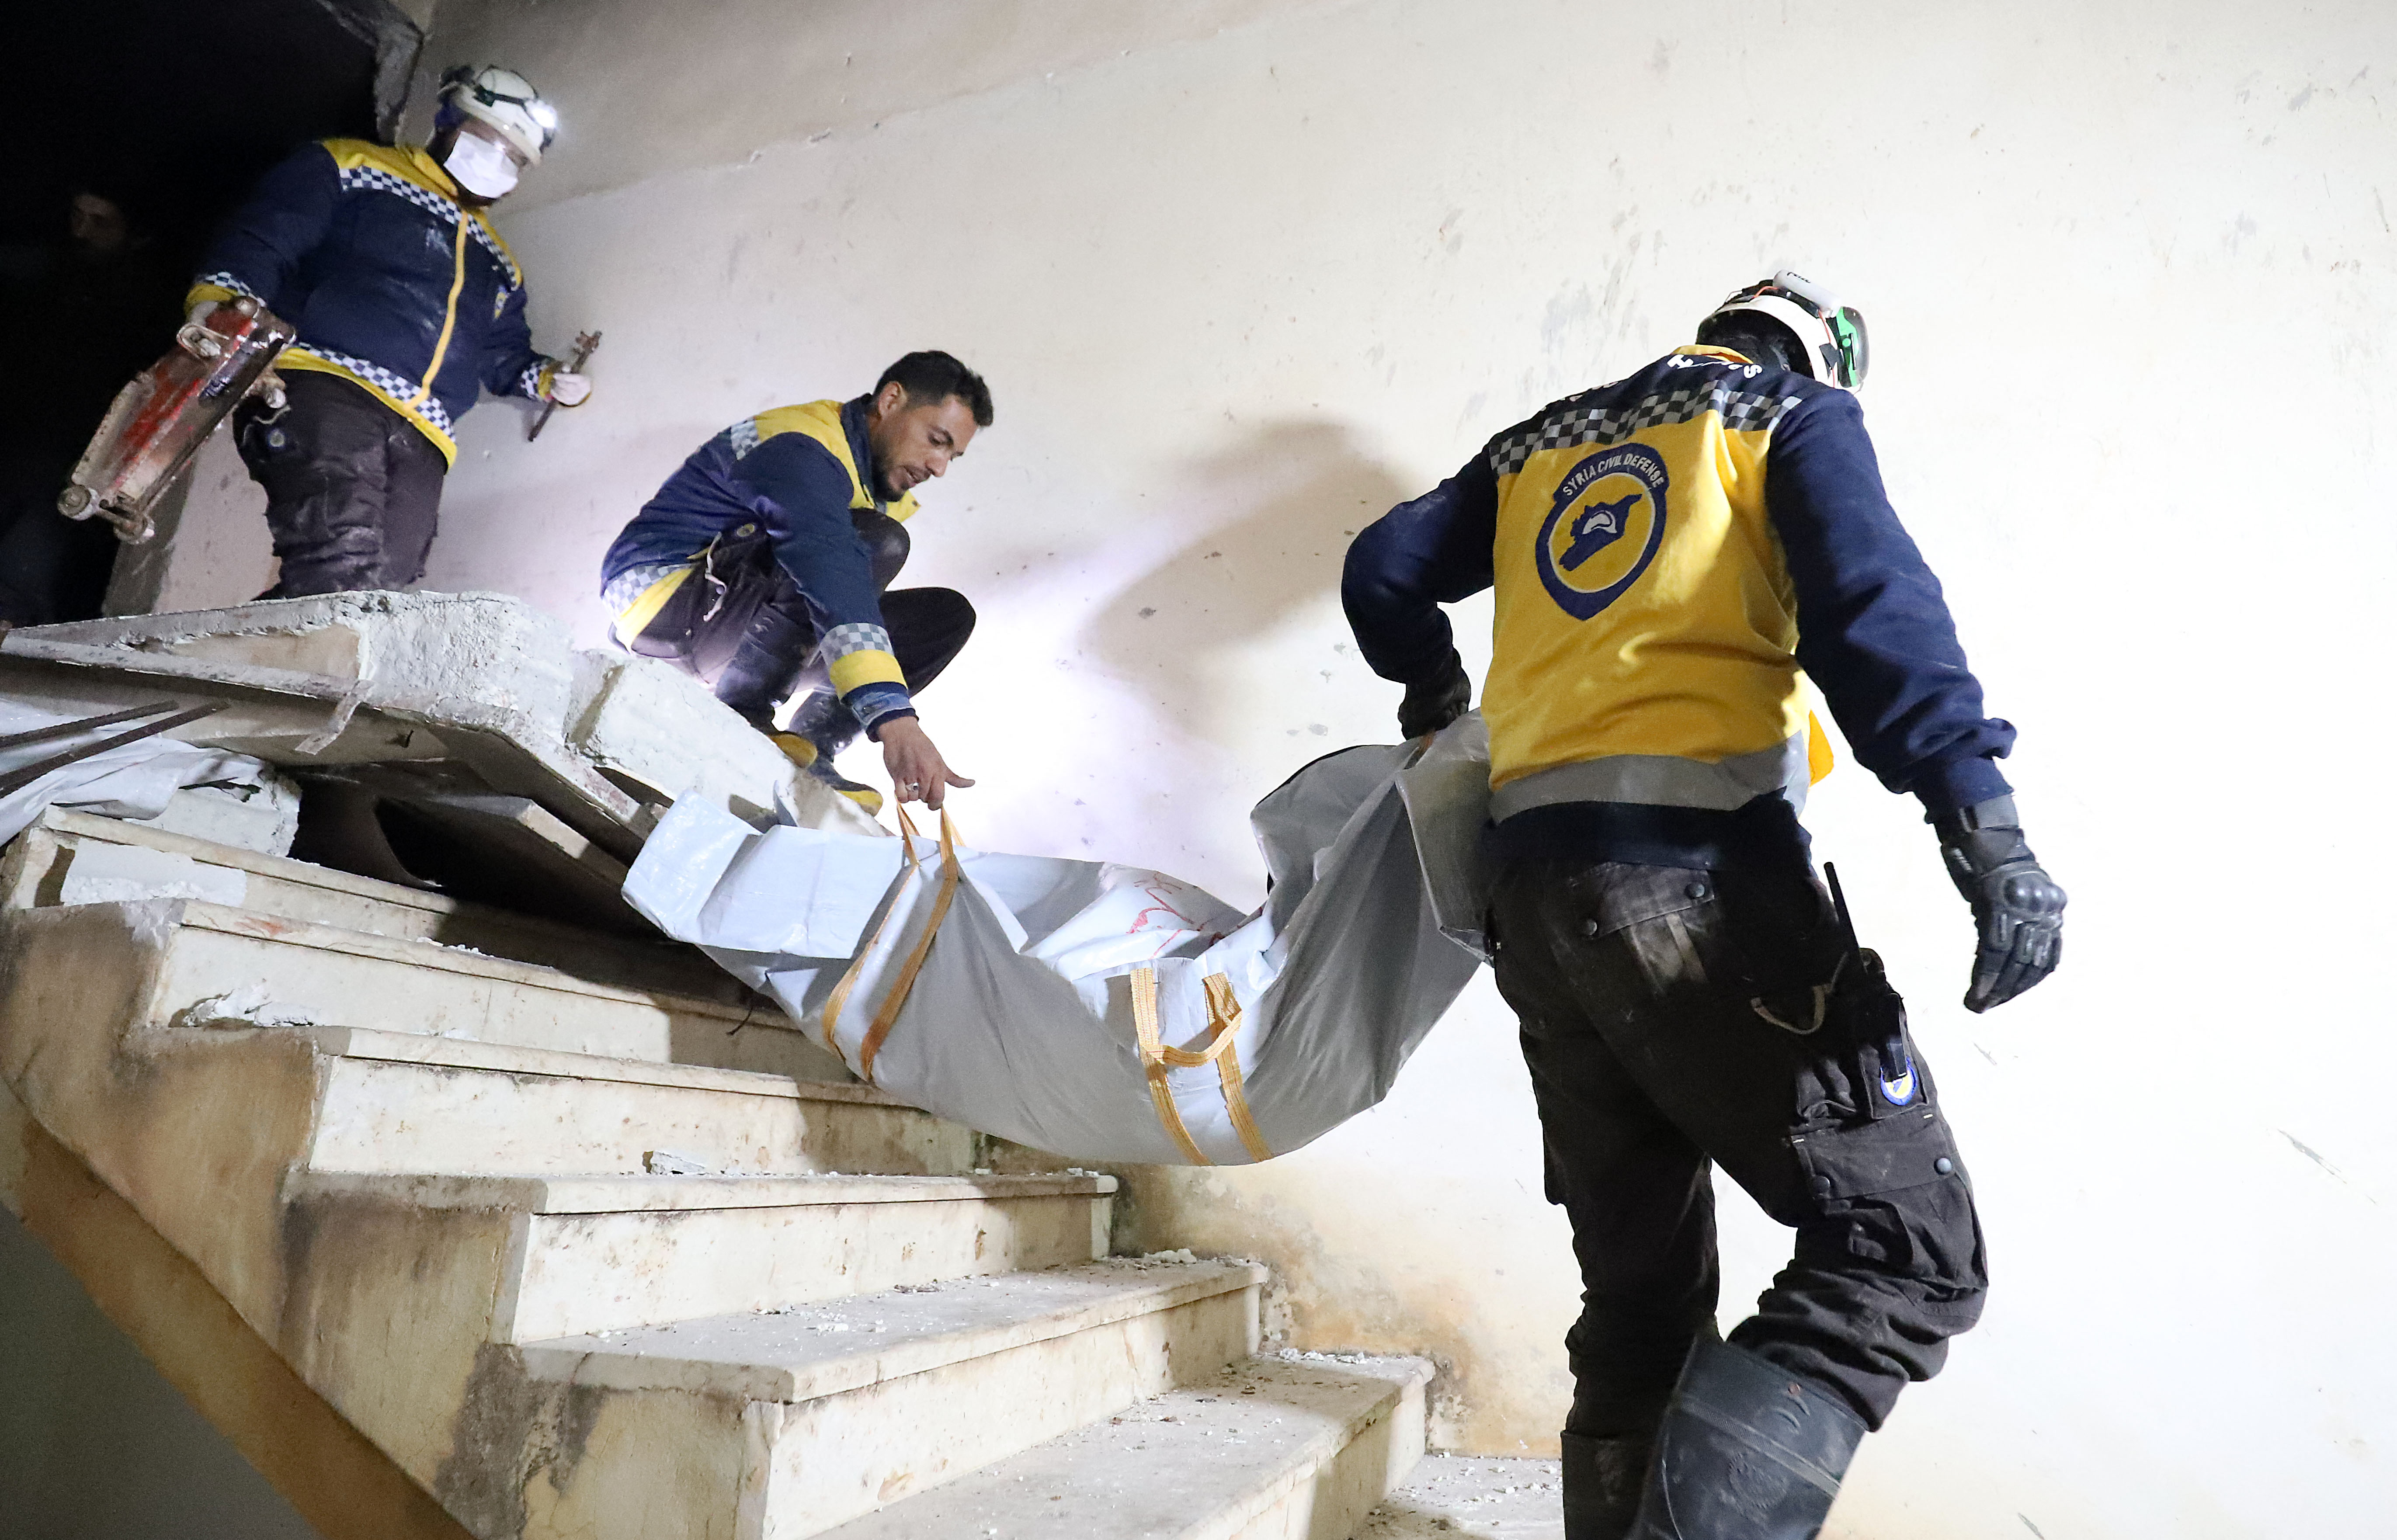 Syrian Civil Defence volunteers evacuate a body from a house in northwestern Syria on February 3 following an overnight raid by US special operations forces against suspected jihadists.